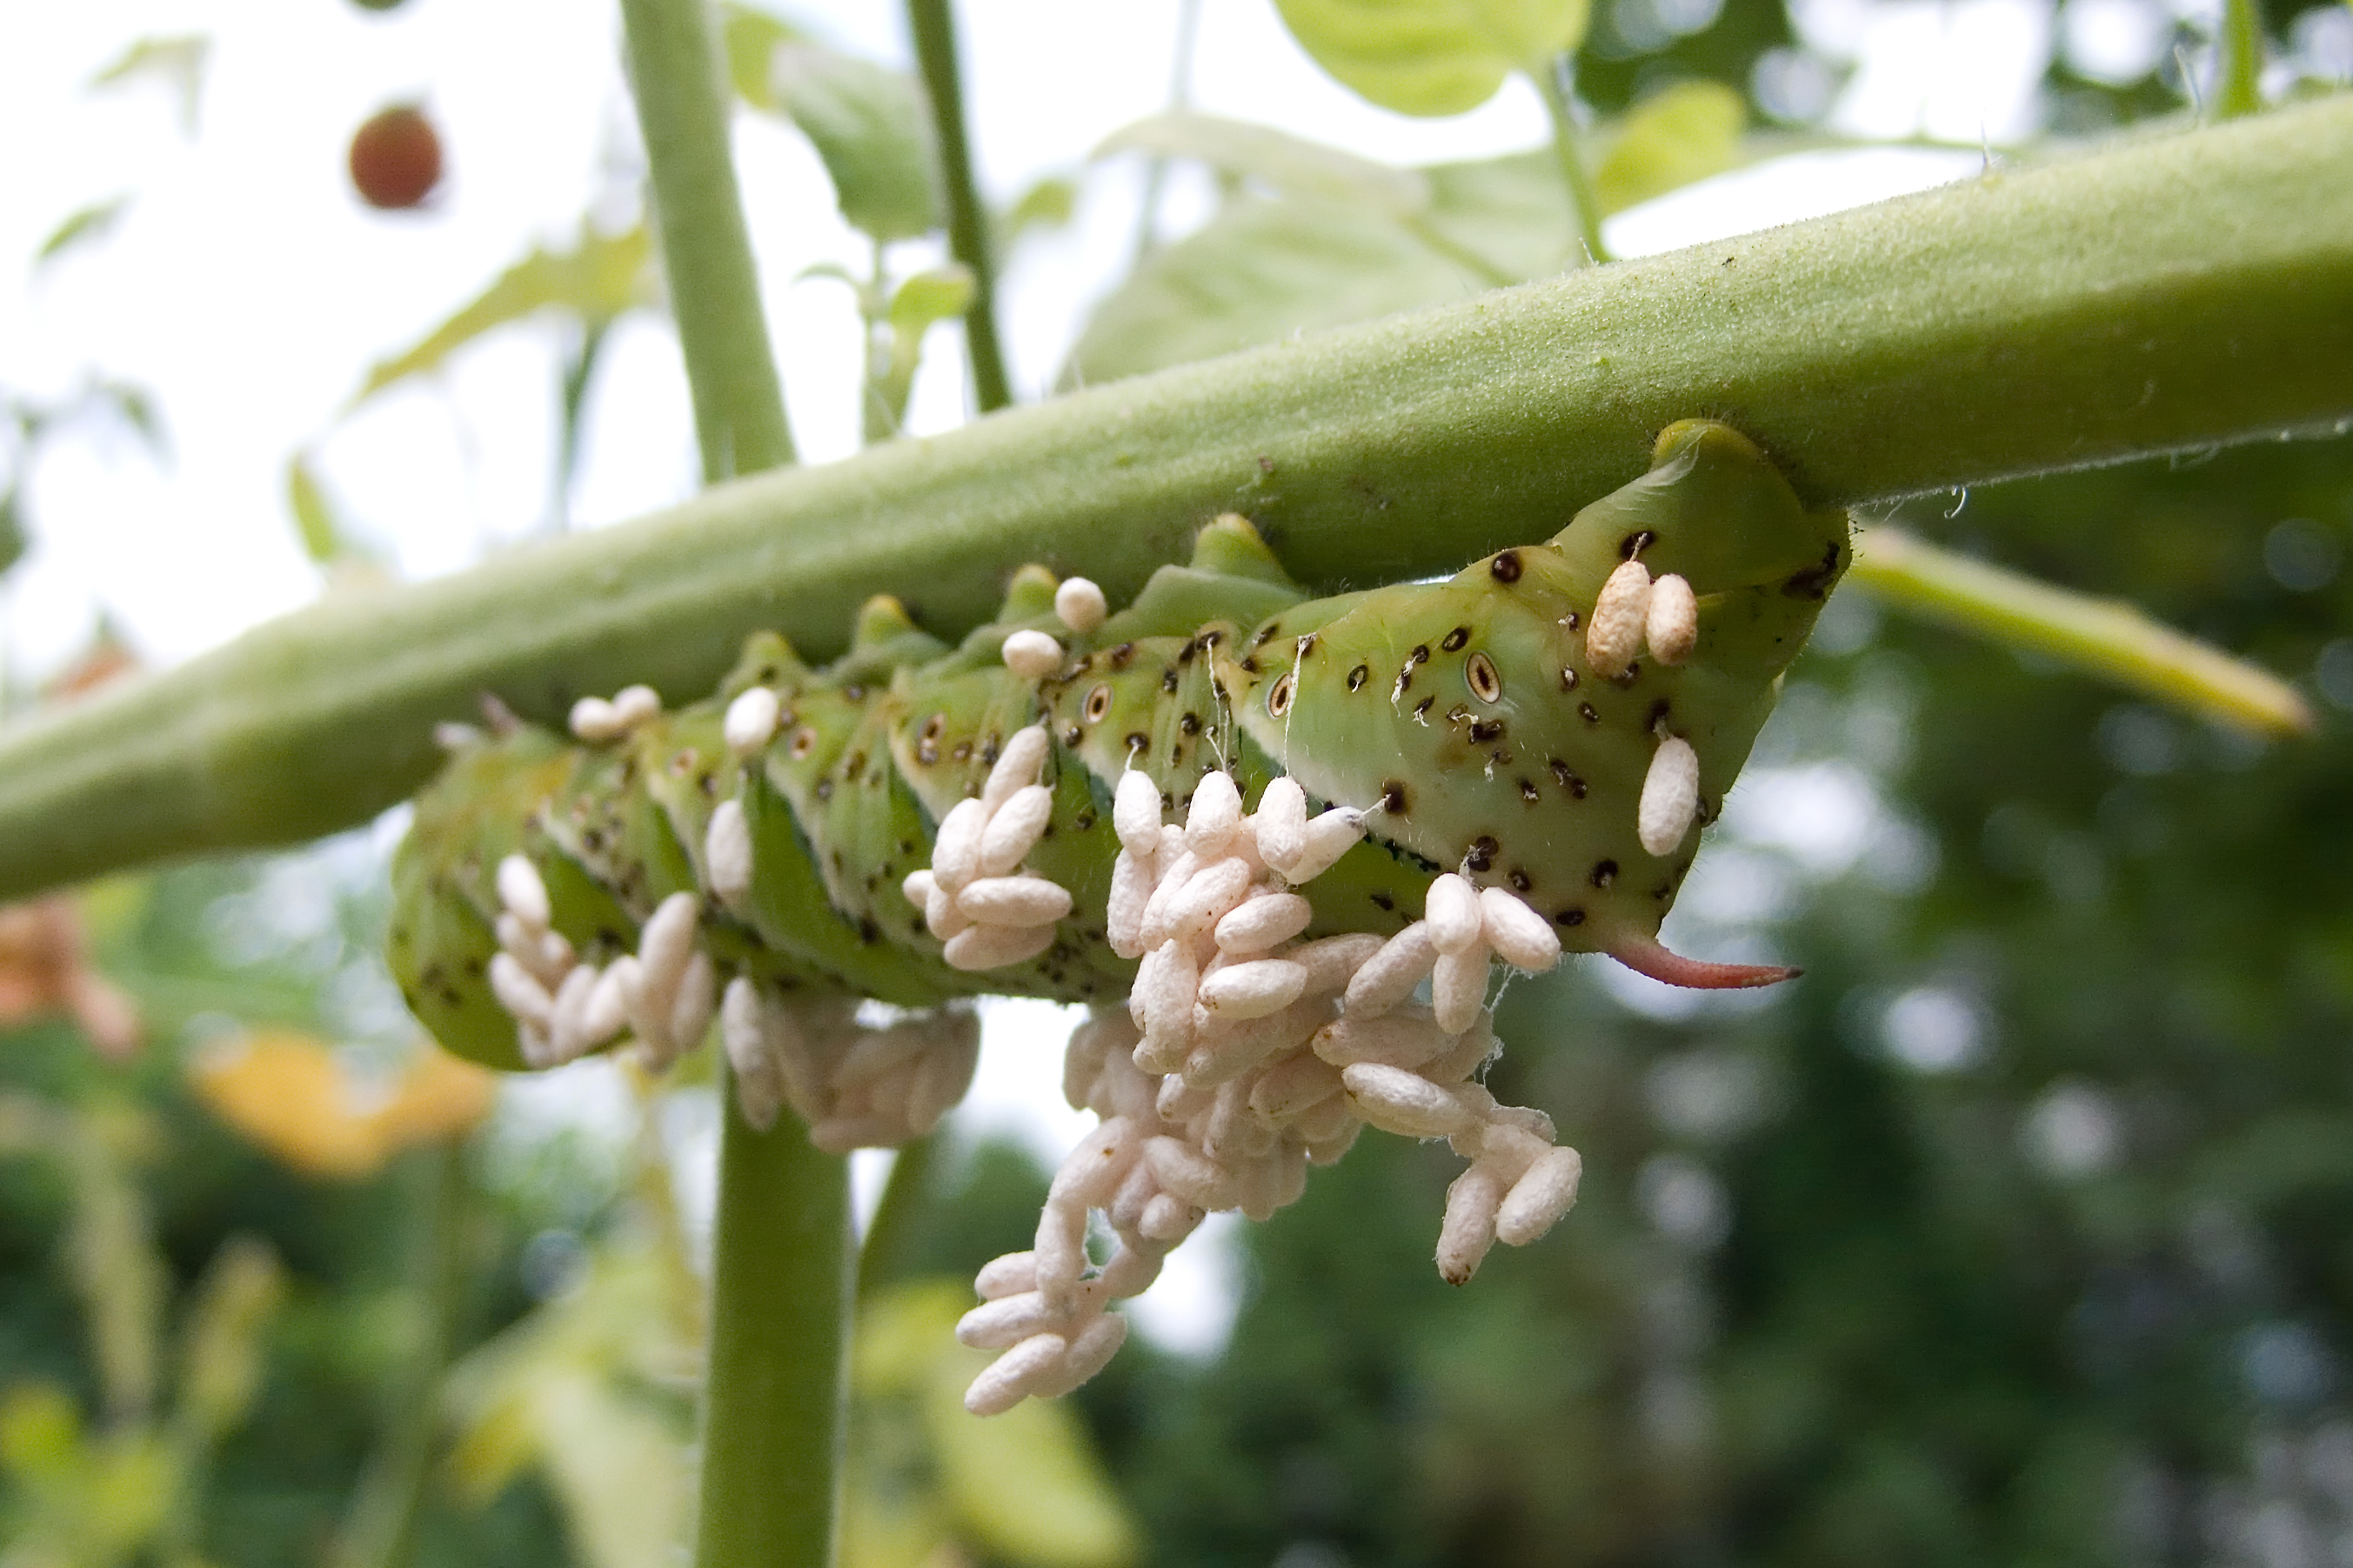 Parasitic Wasps Can Genetically Modify Their Caterpillar Hosts